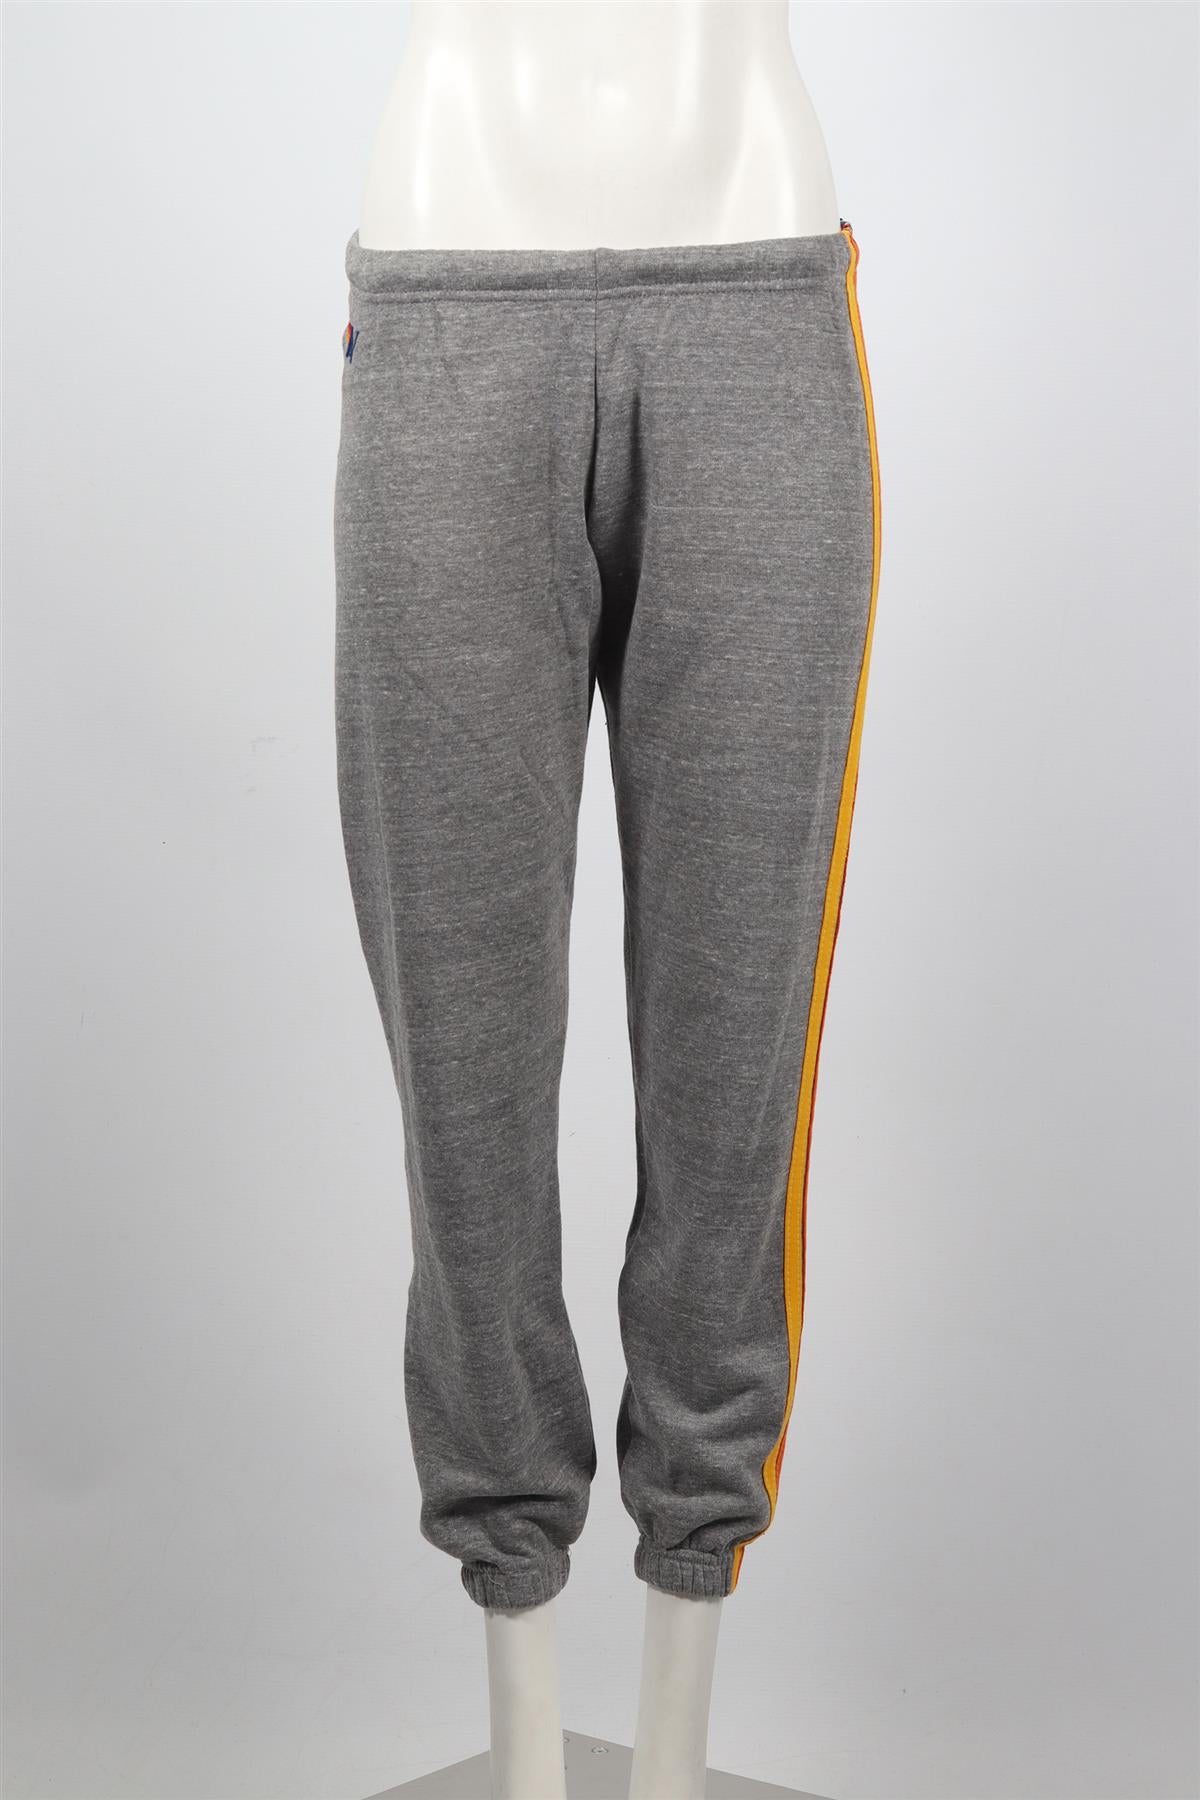 AVIATOR NATION COTTON BLEND TRACK PANTS SMALL